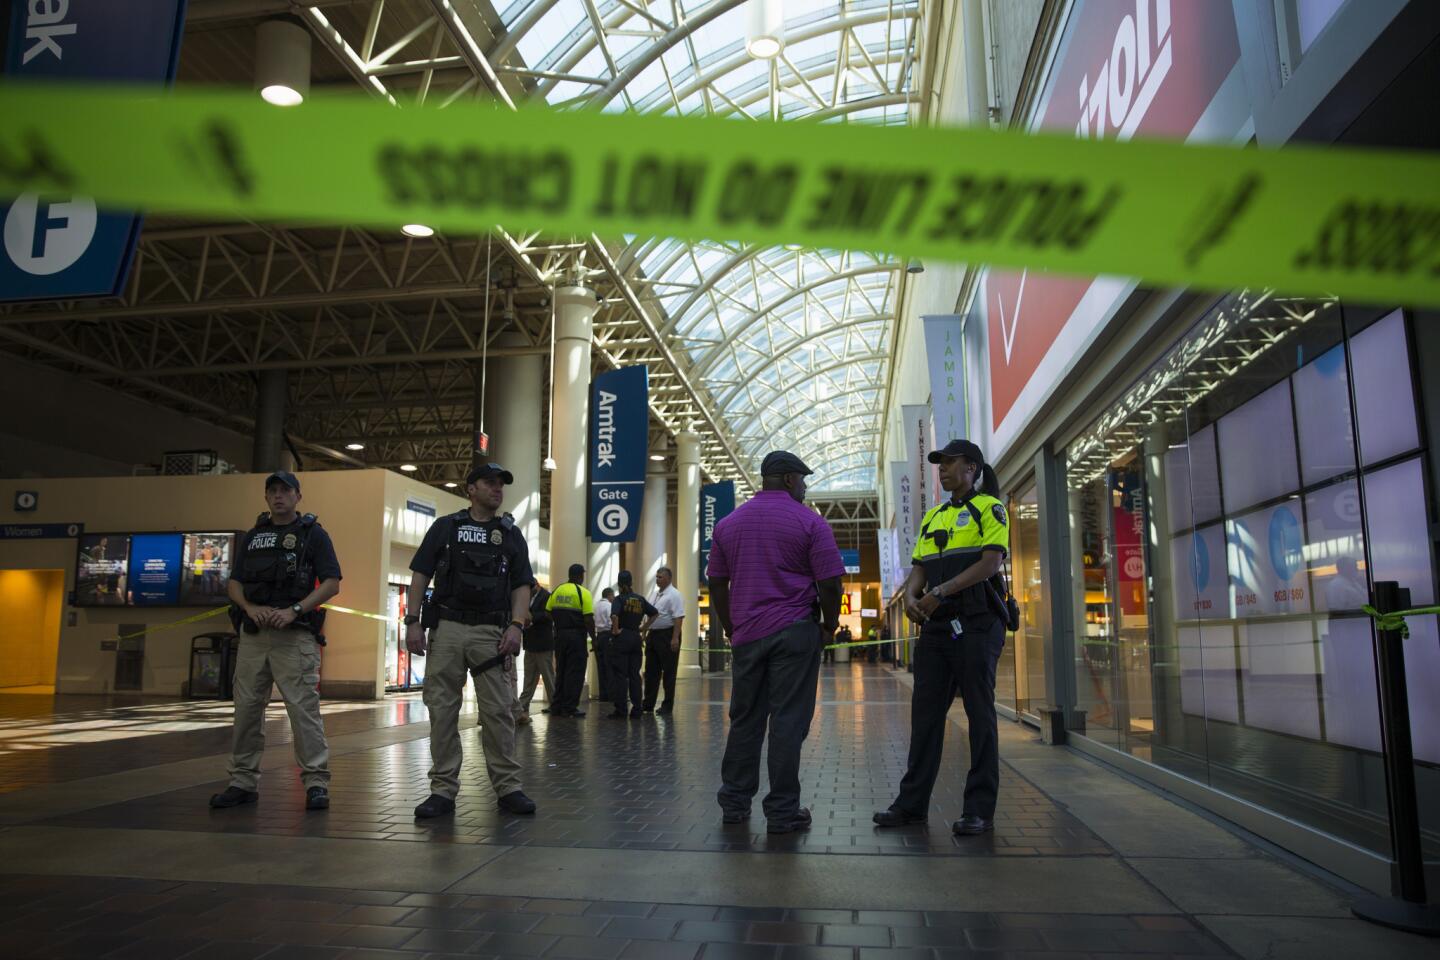 Police and emergency responders stand outside a McDonald's located inside Union Station in Washington, Friday, Sept. 11, 2015.